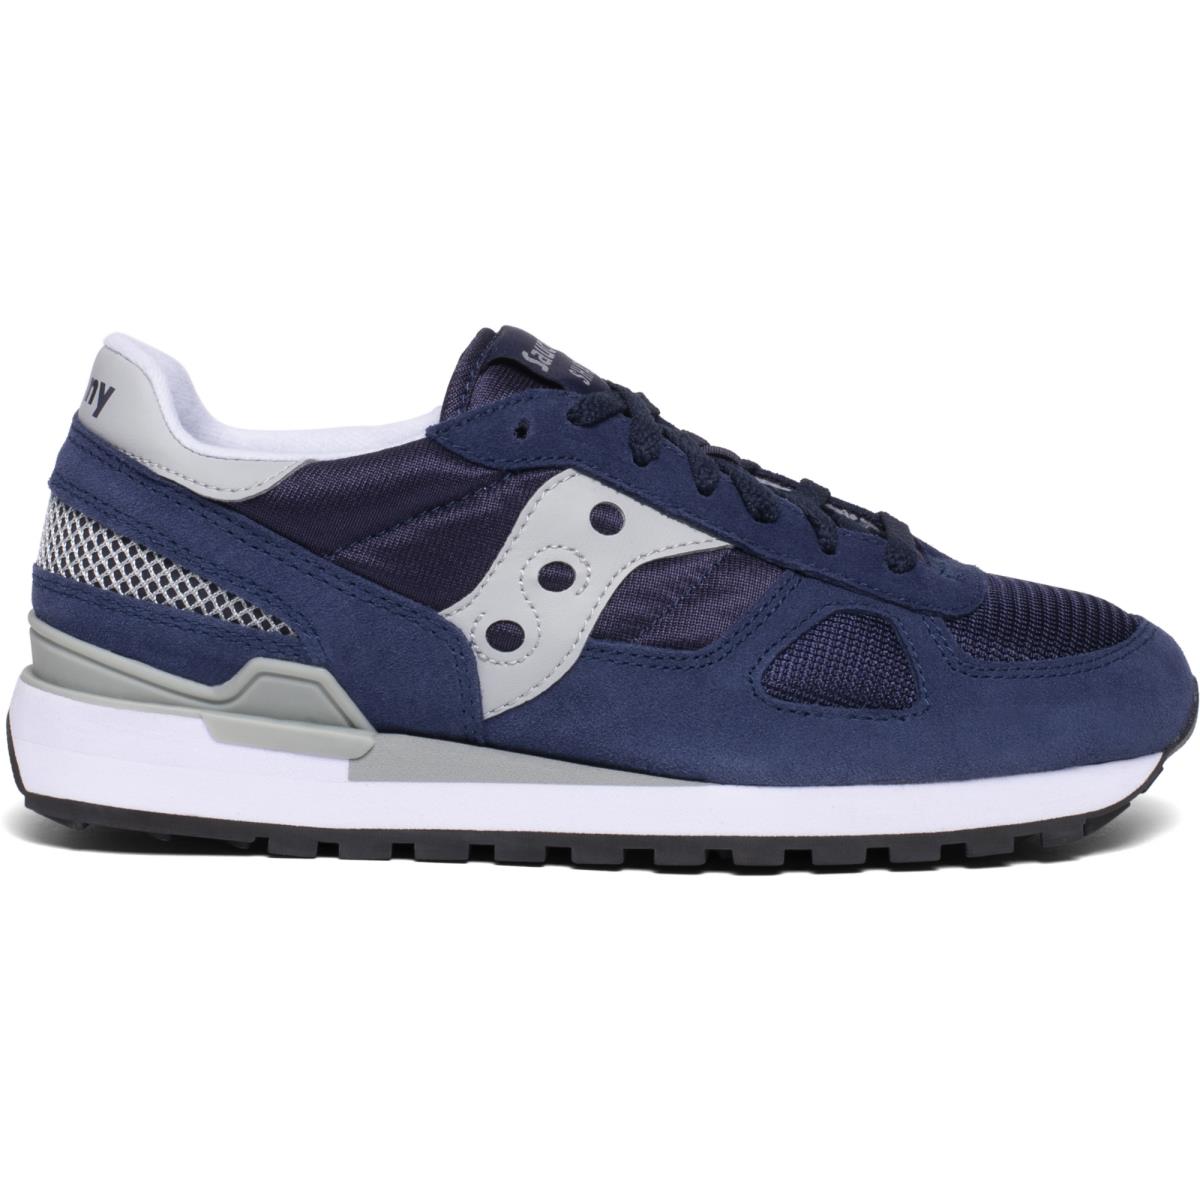 Saucony Men Shadow Running Shoes Fabric Navy / Gray